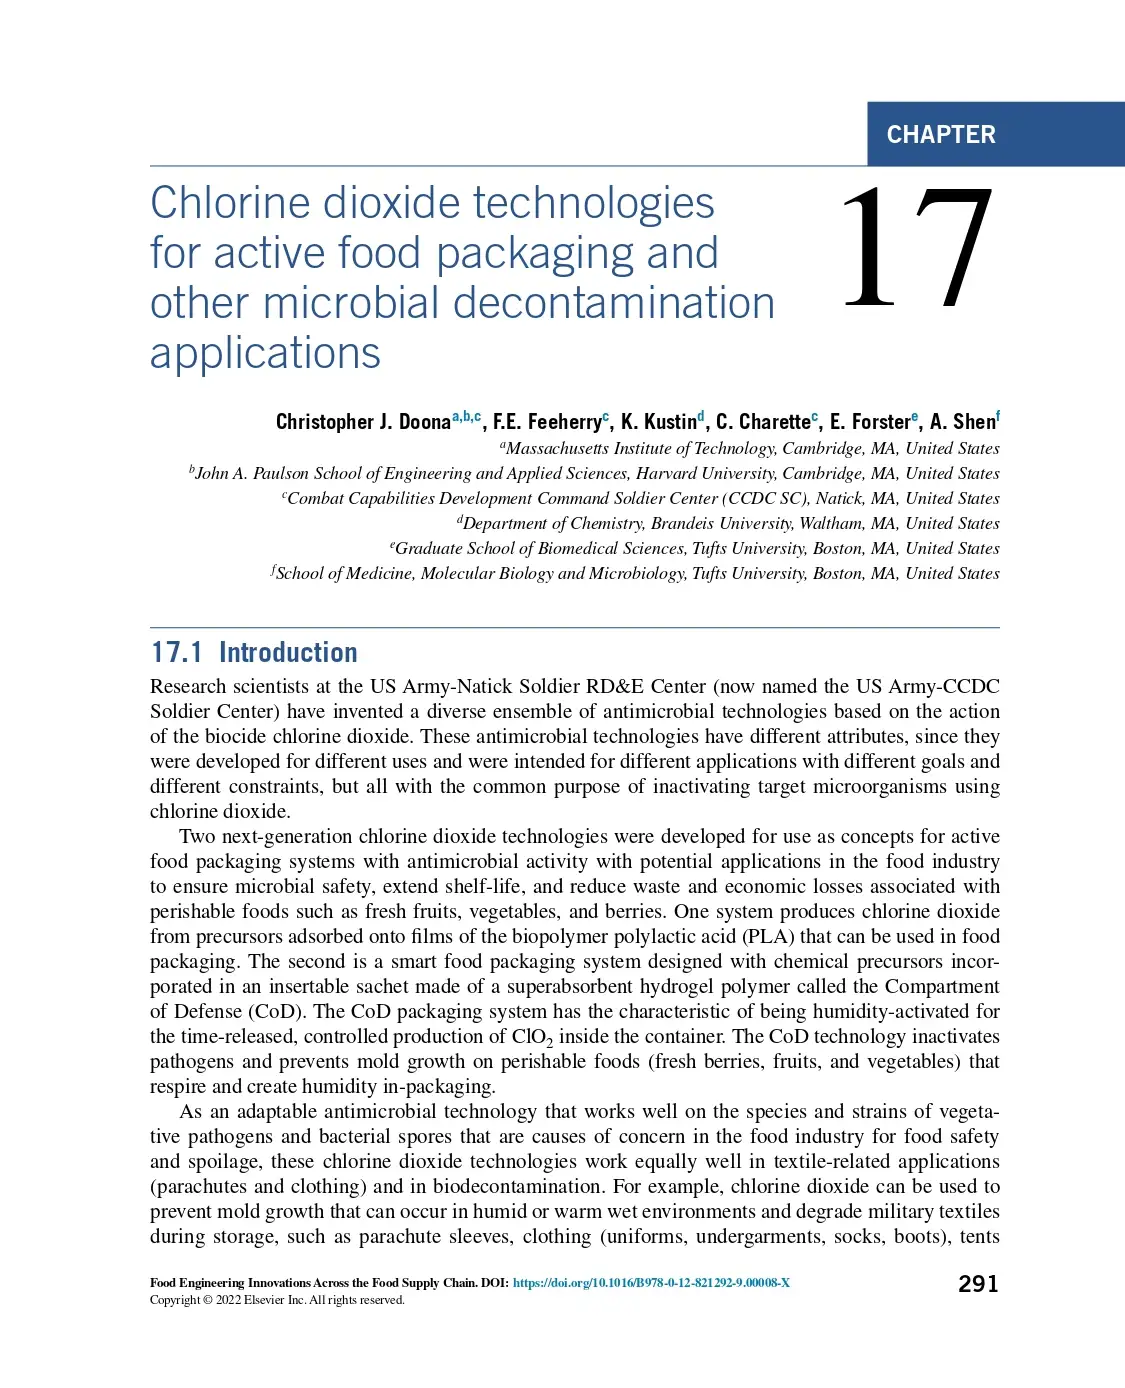 Chlorine Dioxide Technologies for Active Food Packaging and Other Microbial Decontamination Applications